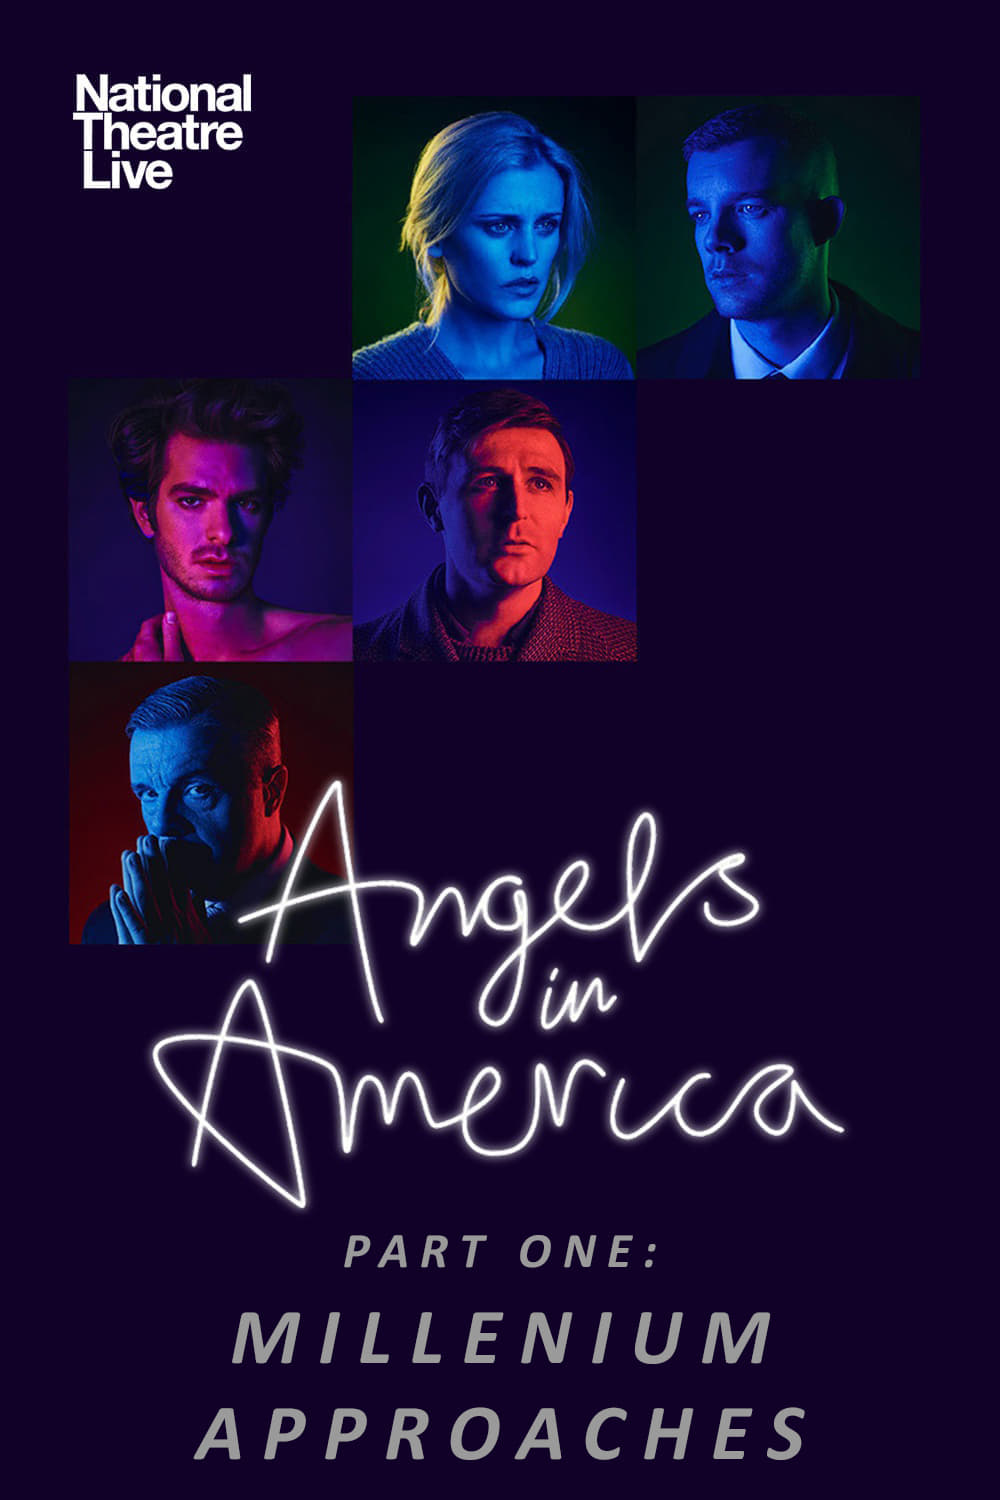 National Theatre Live: Angels In America — Part One: Millennium Approaches film